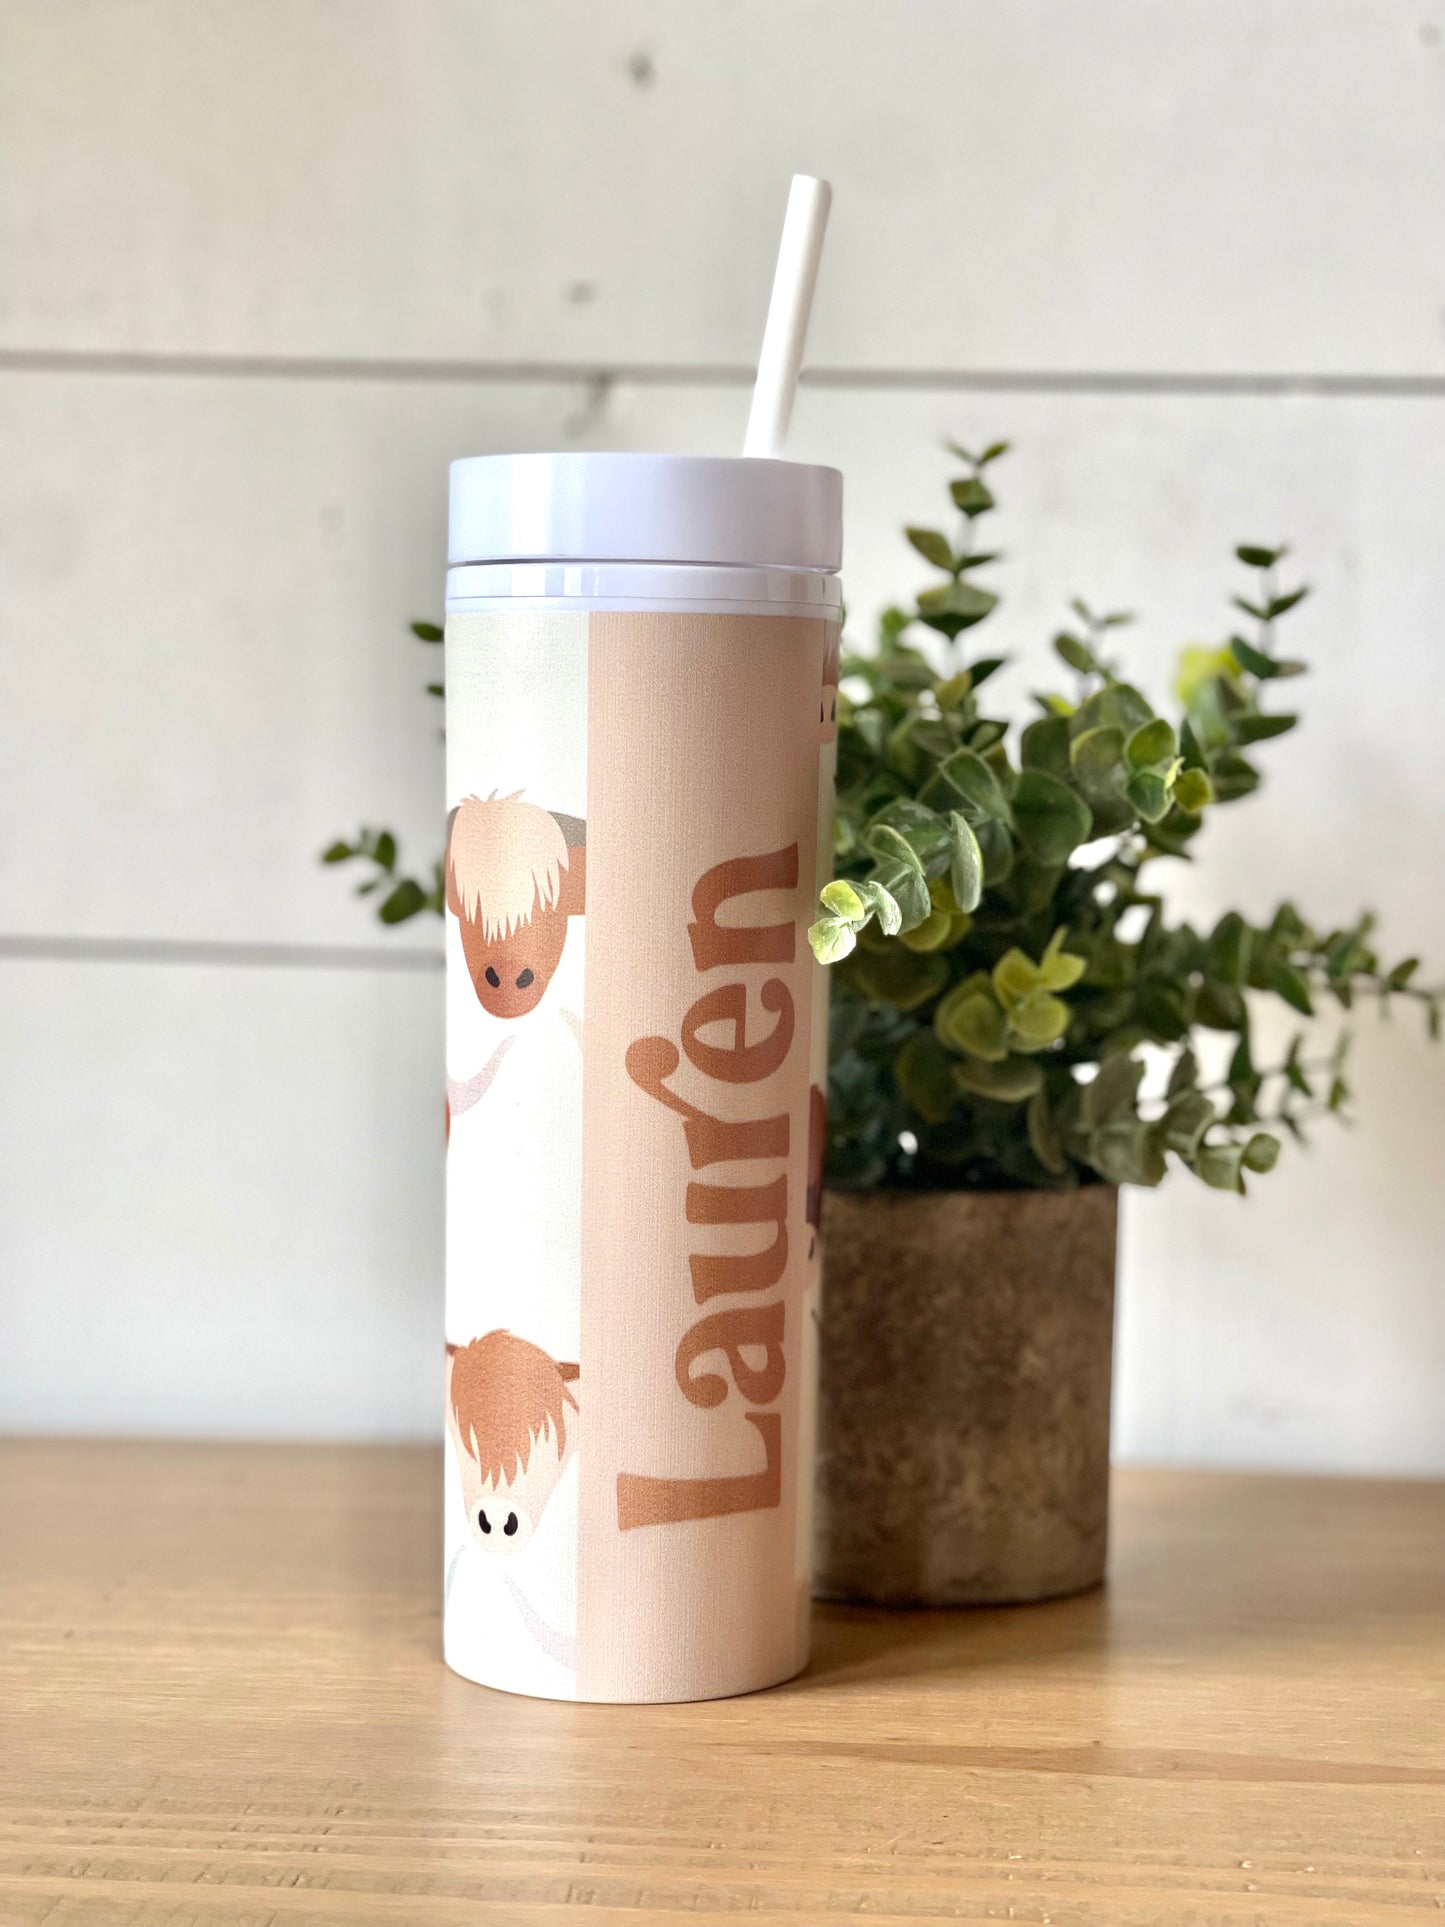 Fluffy Highland Cow Pattern Personalized Skinny Tumbler with Lid and Straw, 16 oz Matte Black Acrylic Tumbler Insulated Double Wall Plastic Reusable Cups